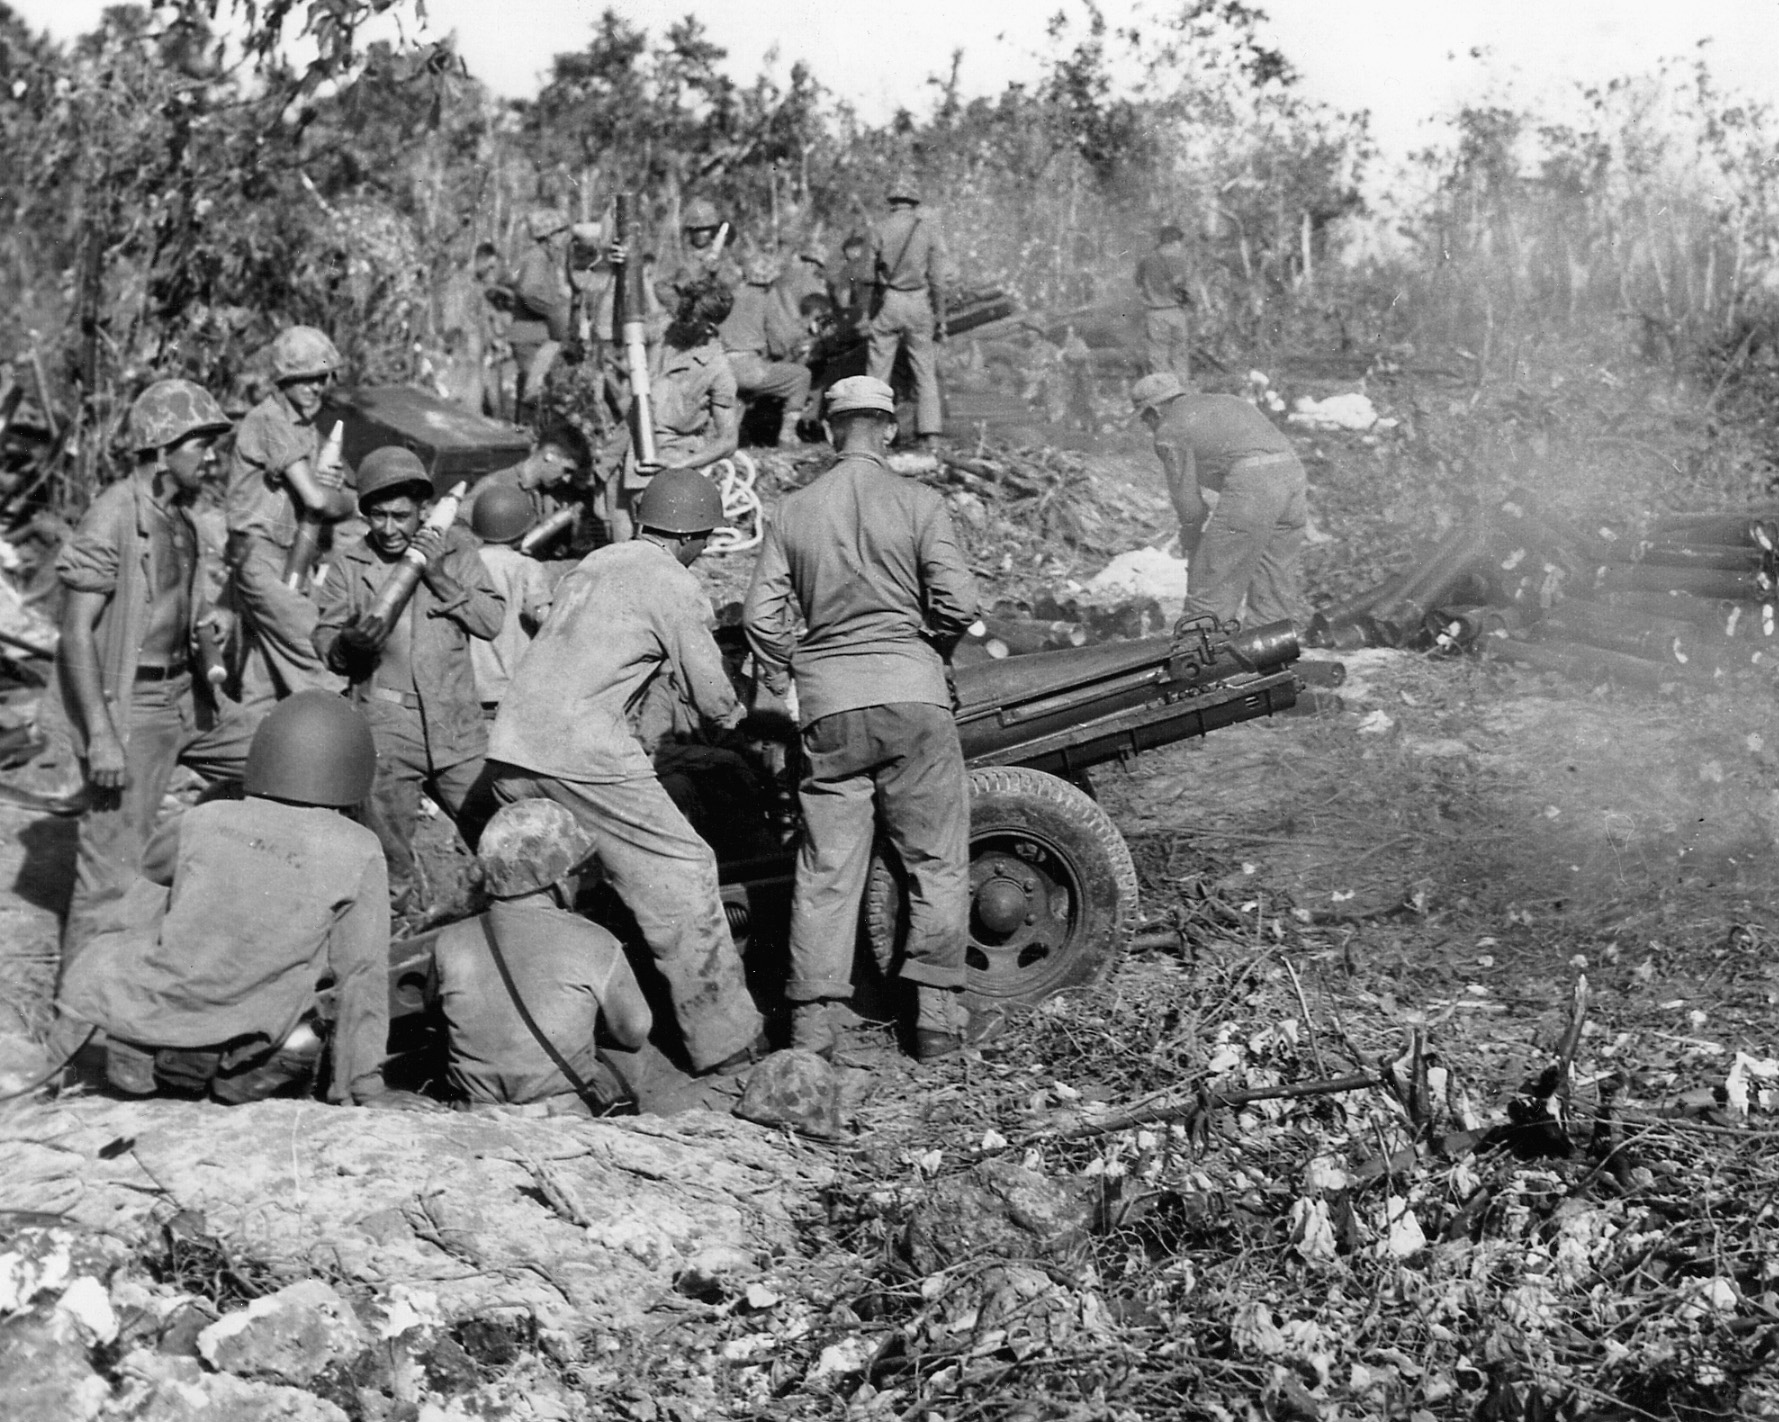 Marine artillery blasts the enemy position just outside Peleliu airfield.